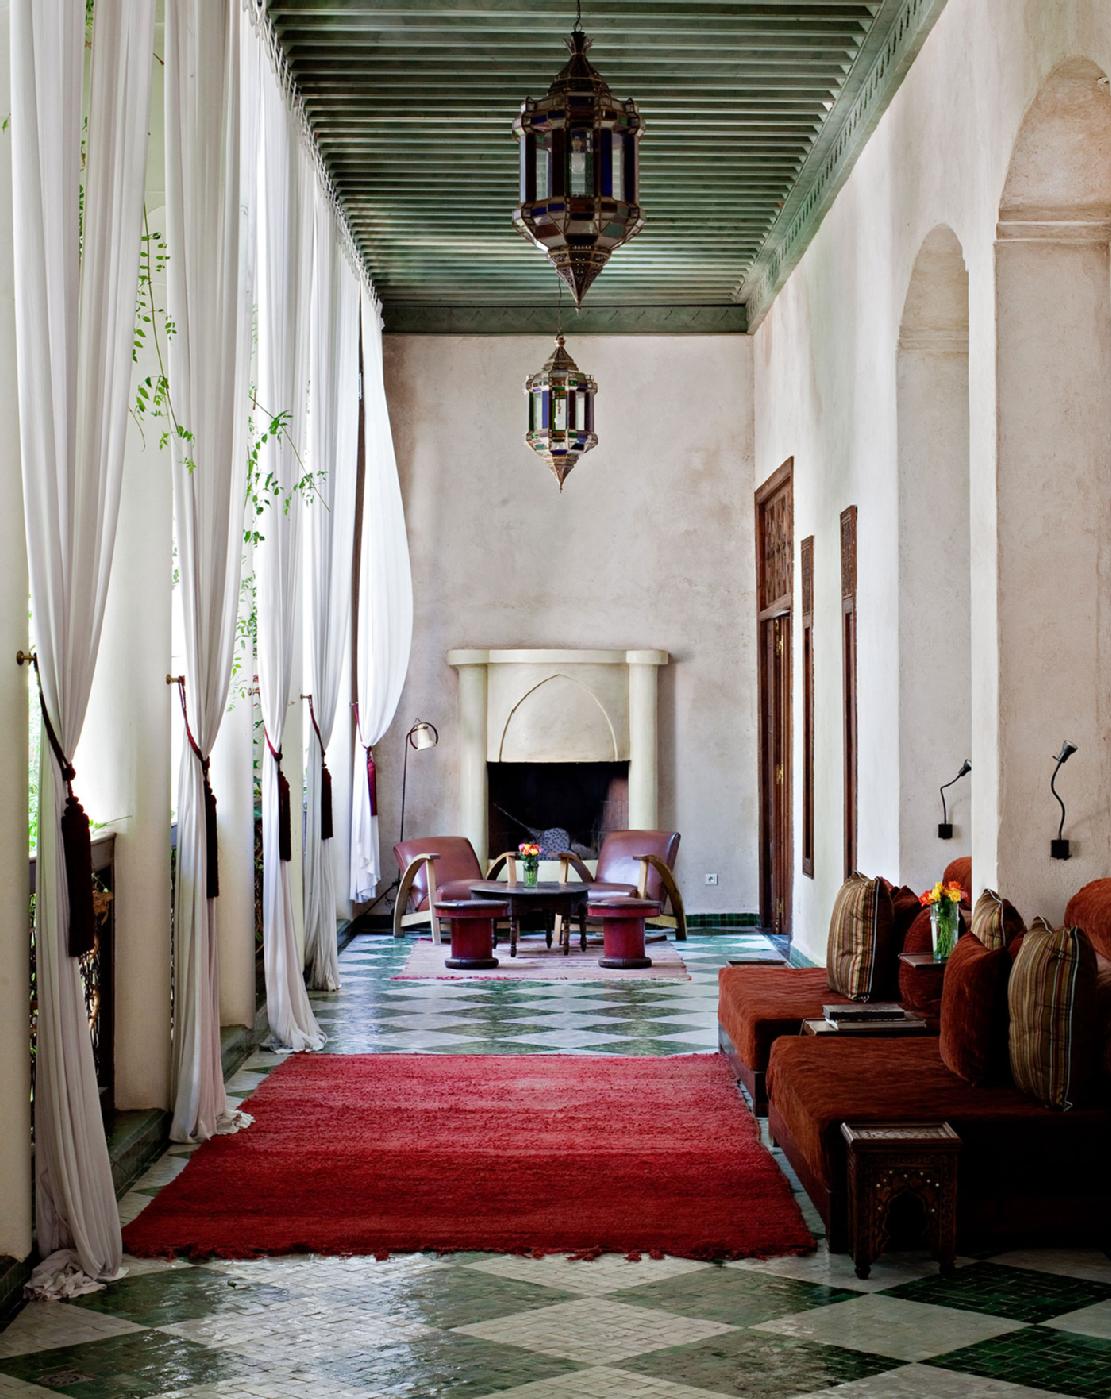  Vanessa Branson&#x2019;s keen artistic eye is profoundly evident at her boutique hotel in the medina